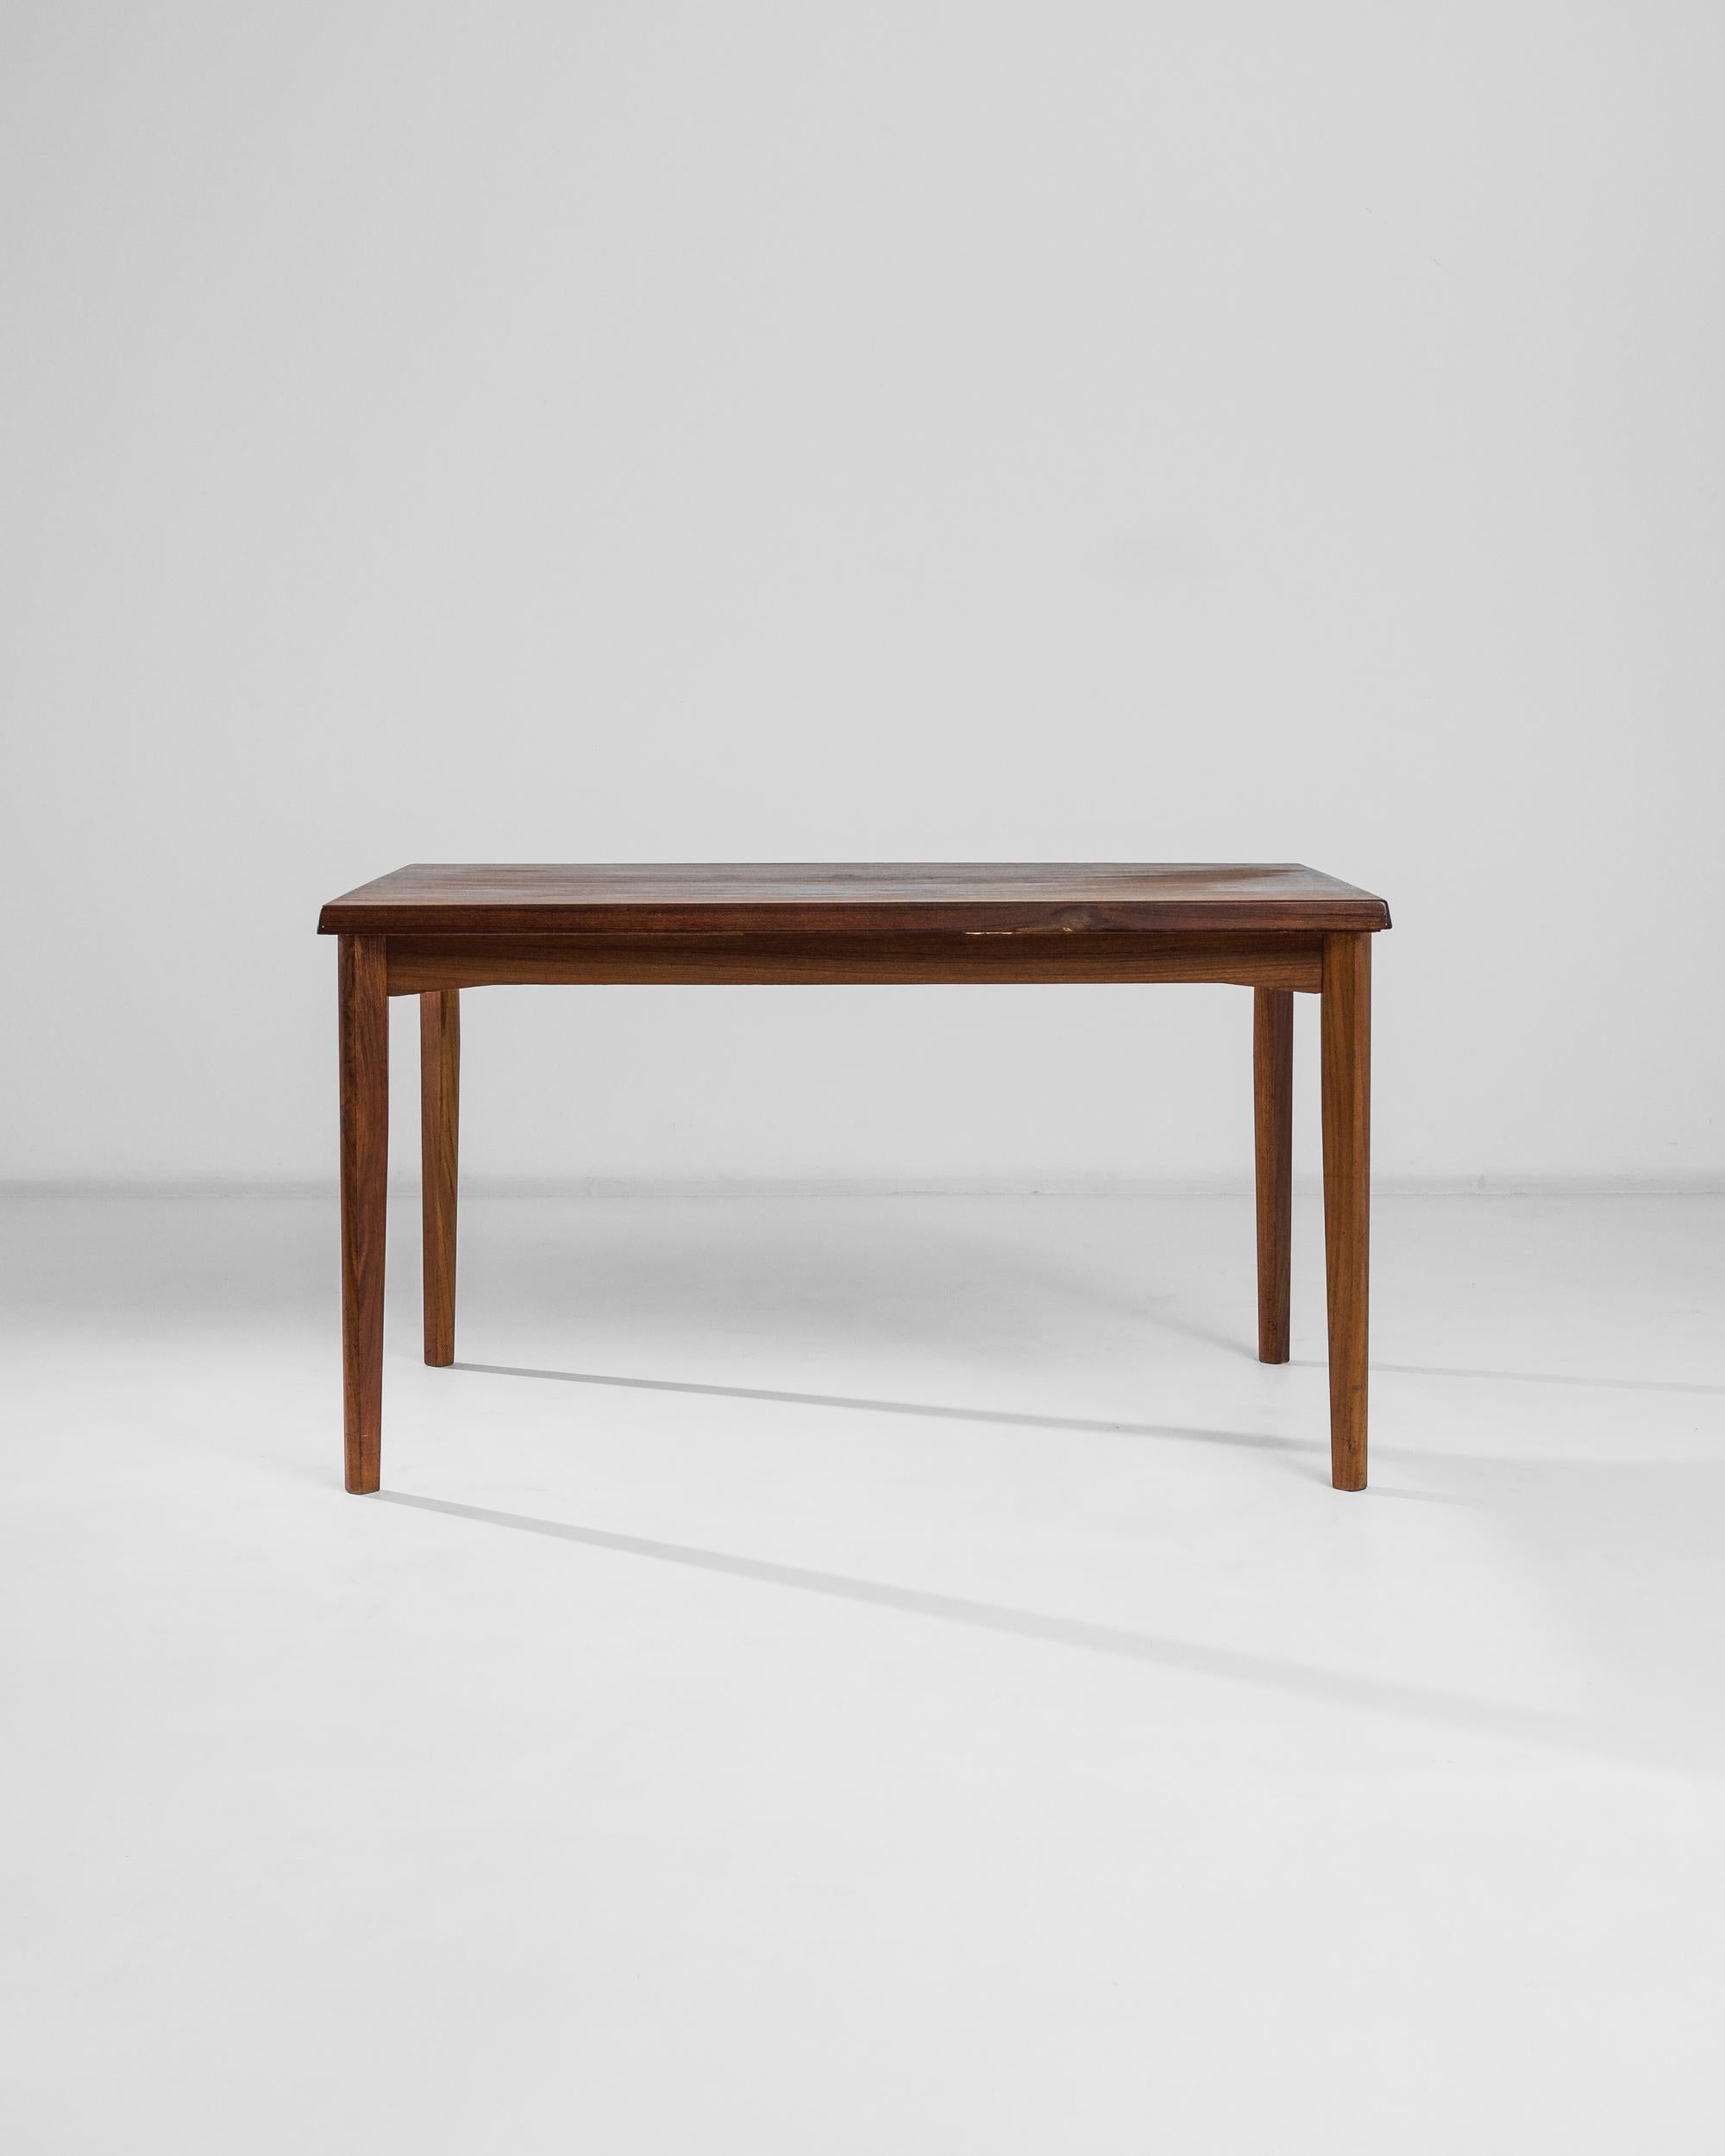 Following the core principles of Scandinavian design —simplicity, functionality and good taste —this Danish teak table manufactured circa 1970 features a practical folding tabletop that expands to twice its size. Visible asymmetry of the apron